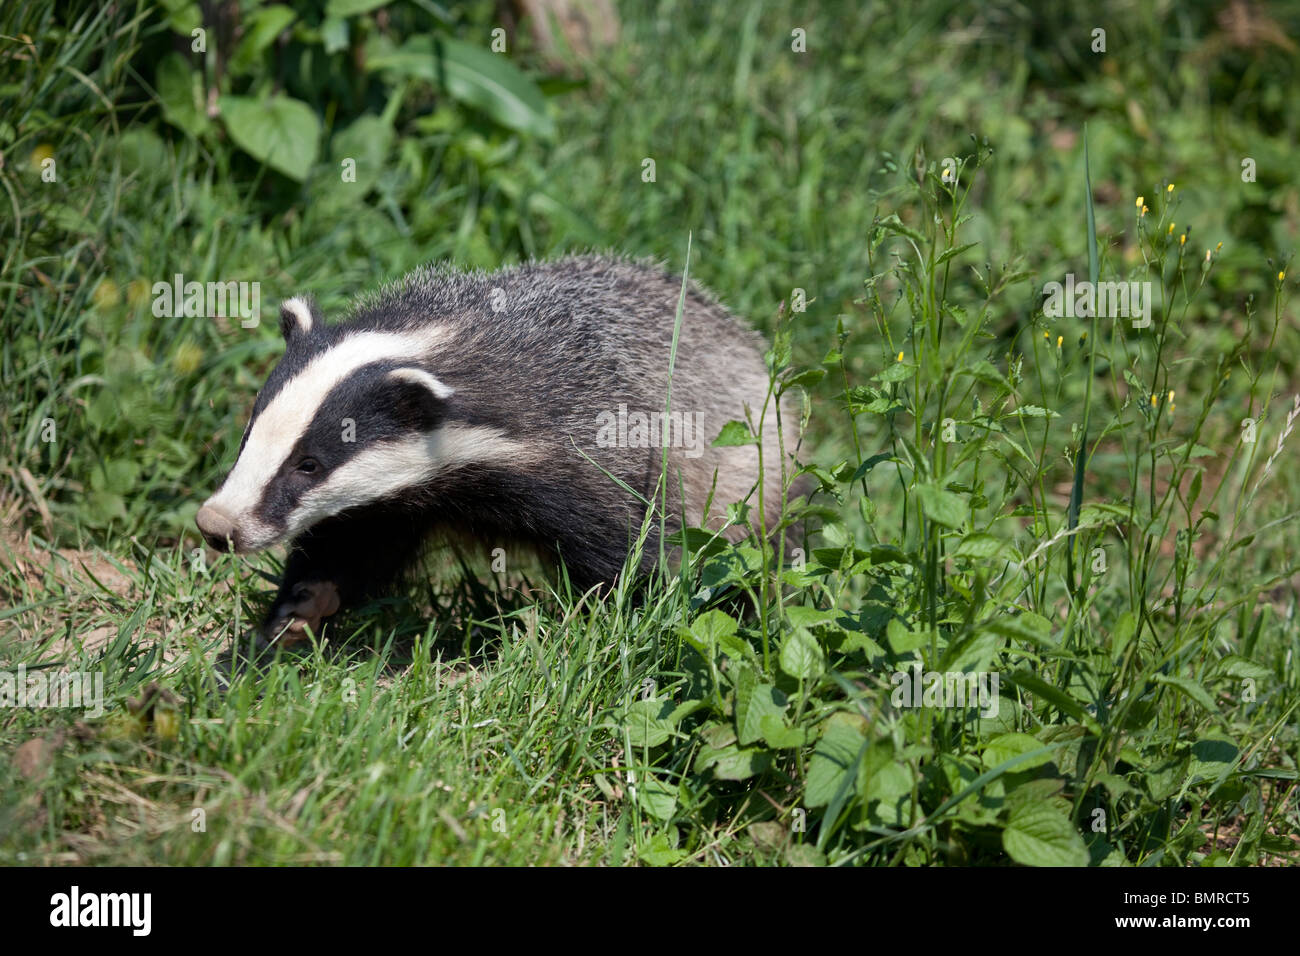 A European Badger cub Meles Meles foraging in grassland taken under controlled conditions Stock Photo